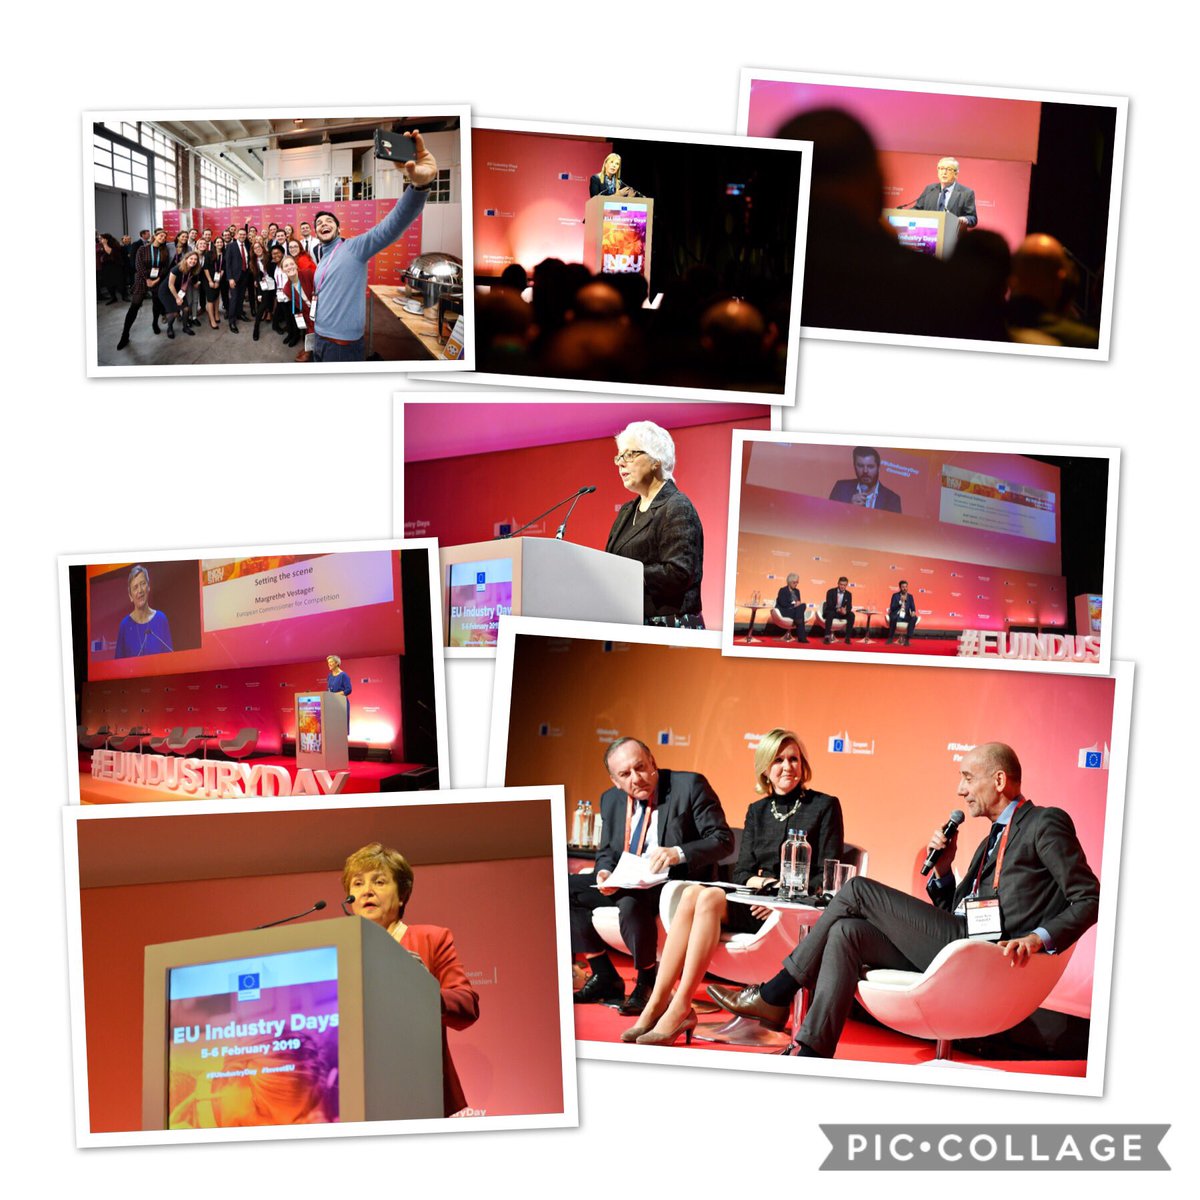 Missed #EUIndustryDay 2019? You can now watch all the speeches & sessions on our page bit.ly/2FZcXqi